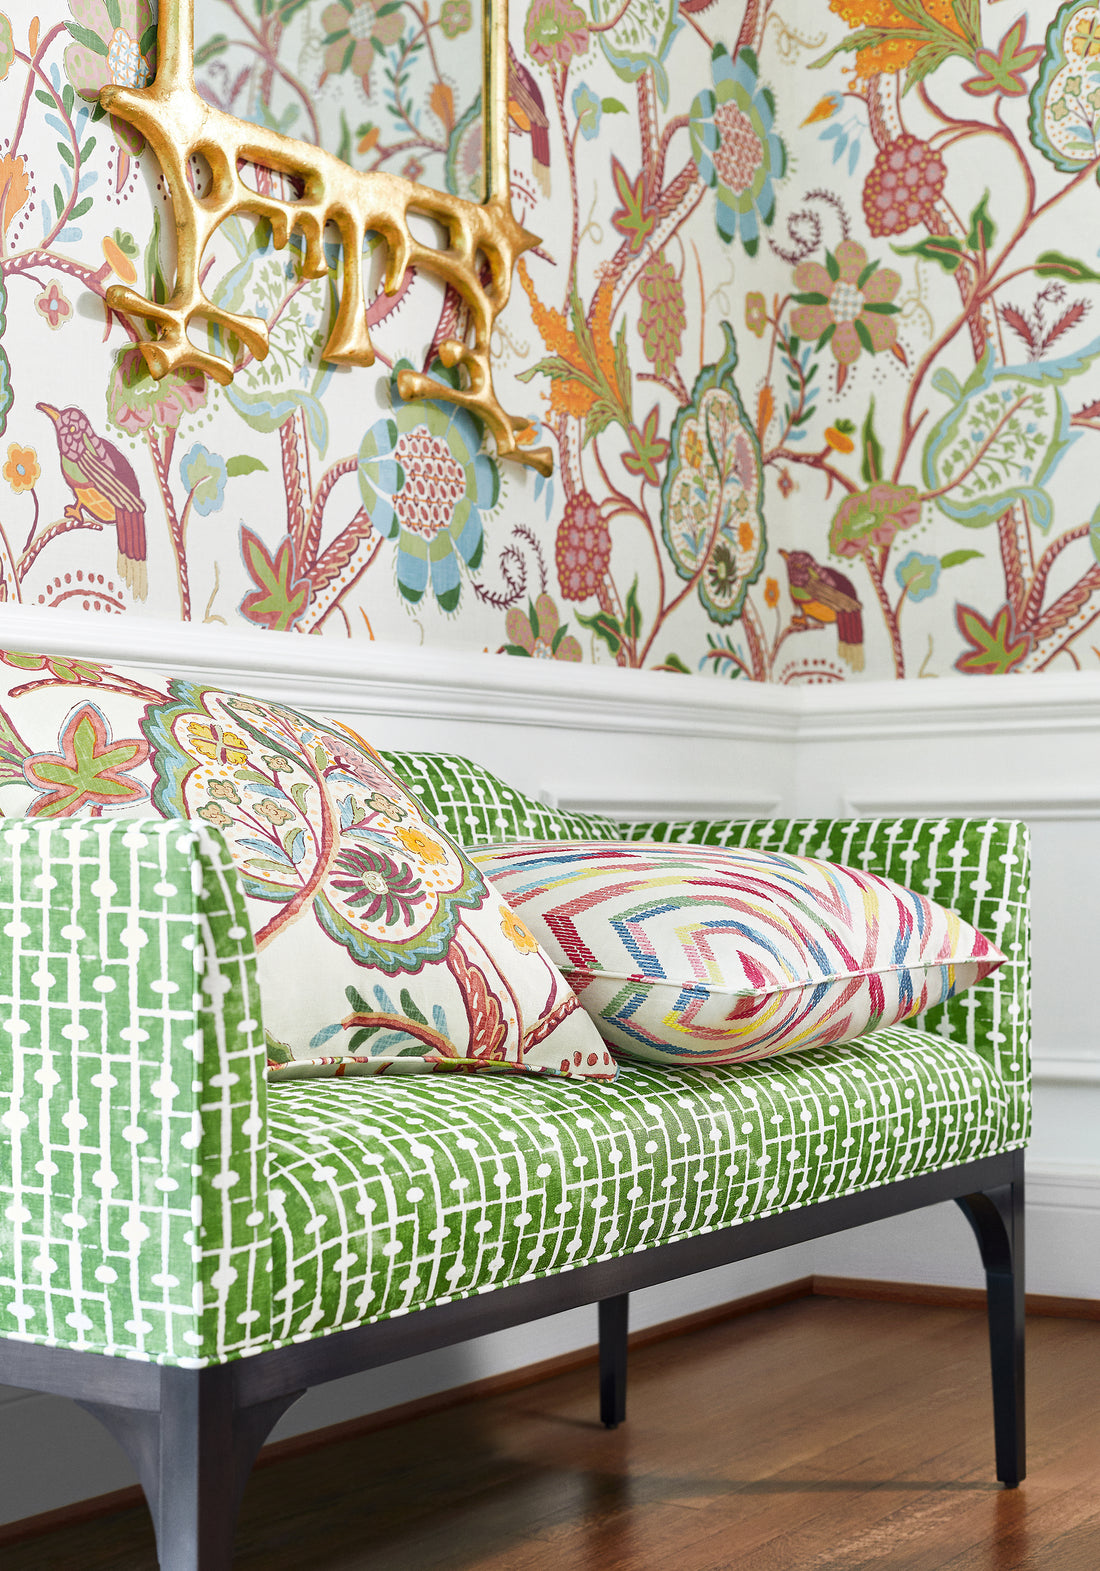 Dorset Bench upholstered in Thibaut Haven printed fabric in Green color - pattern number F914309